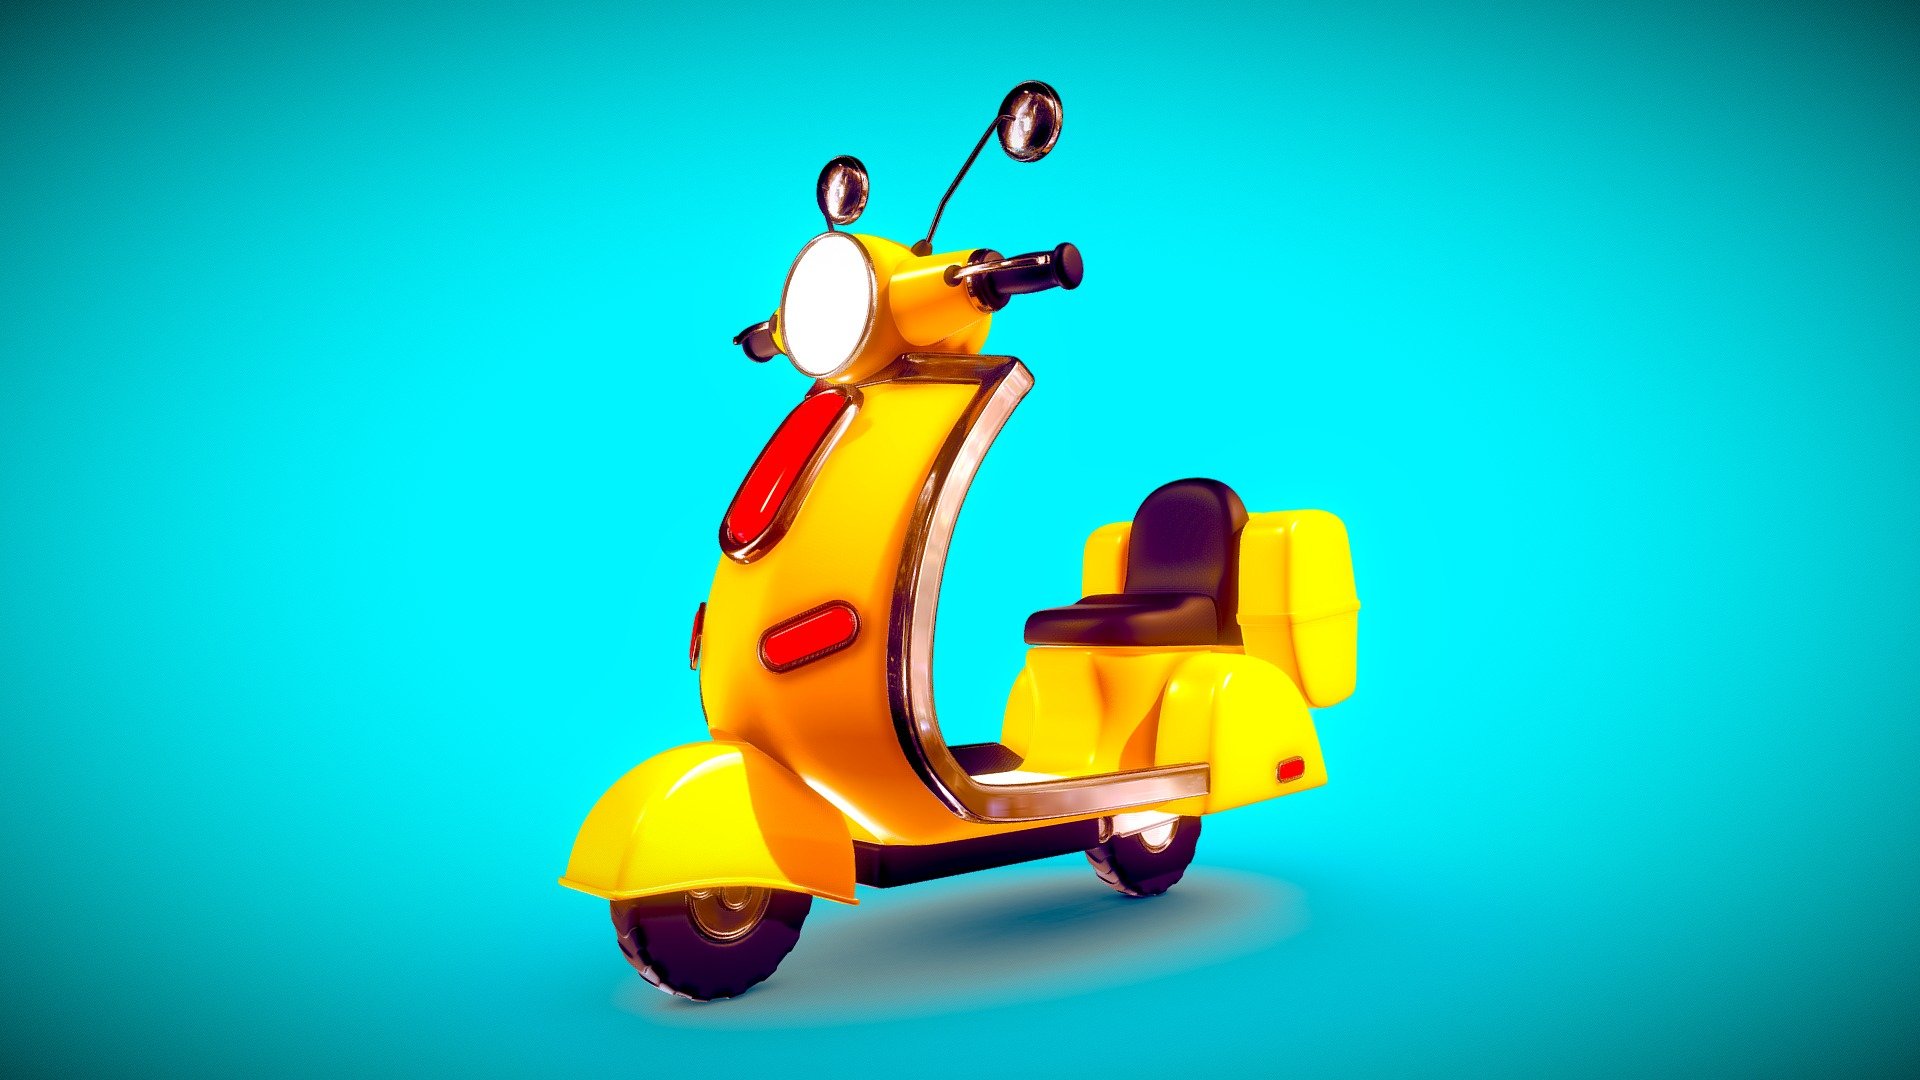 Sketchfab 3December 2021 Challenge!!!

2nd DAY-Scooter

Hello guys, this is scooter I made with 3dsmax, very simple model.

Hope you like it 3d model